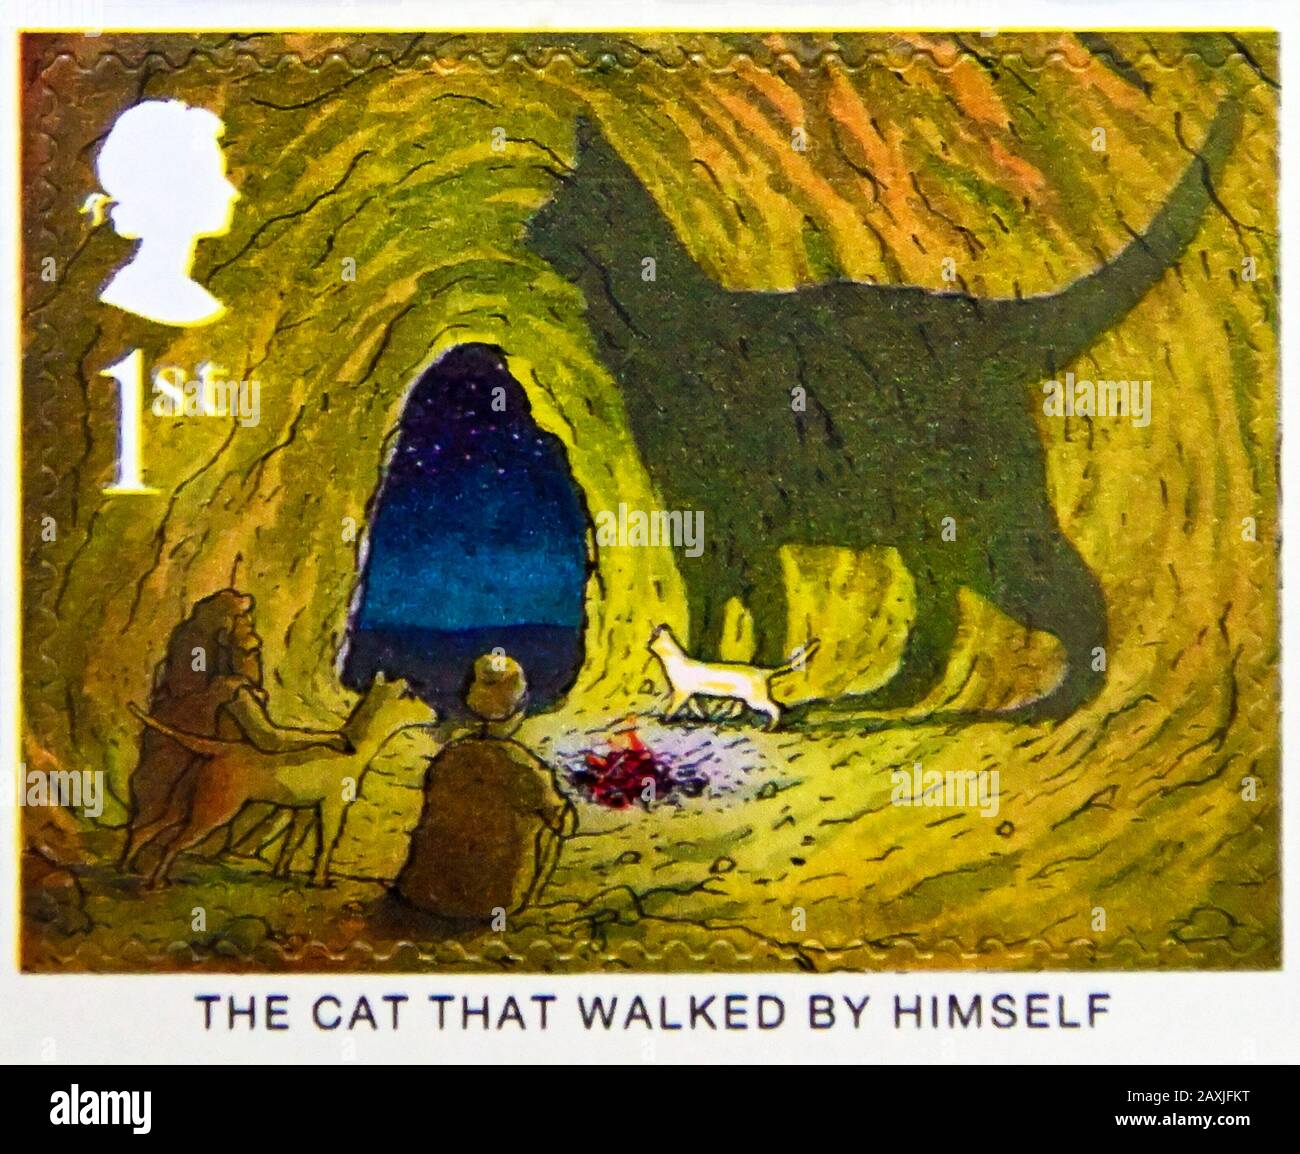 Postage stamp. Great Britain. Queen Elizabeth II. Centenary of Publication of Rudyard Kipling's Just So Stories. 'The Cat that walked by Himself'. 1st Stock Photo